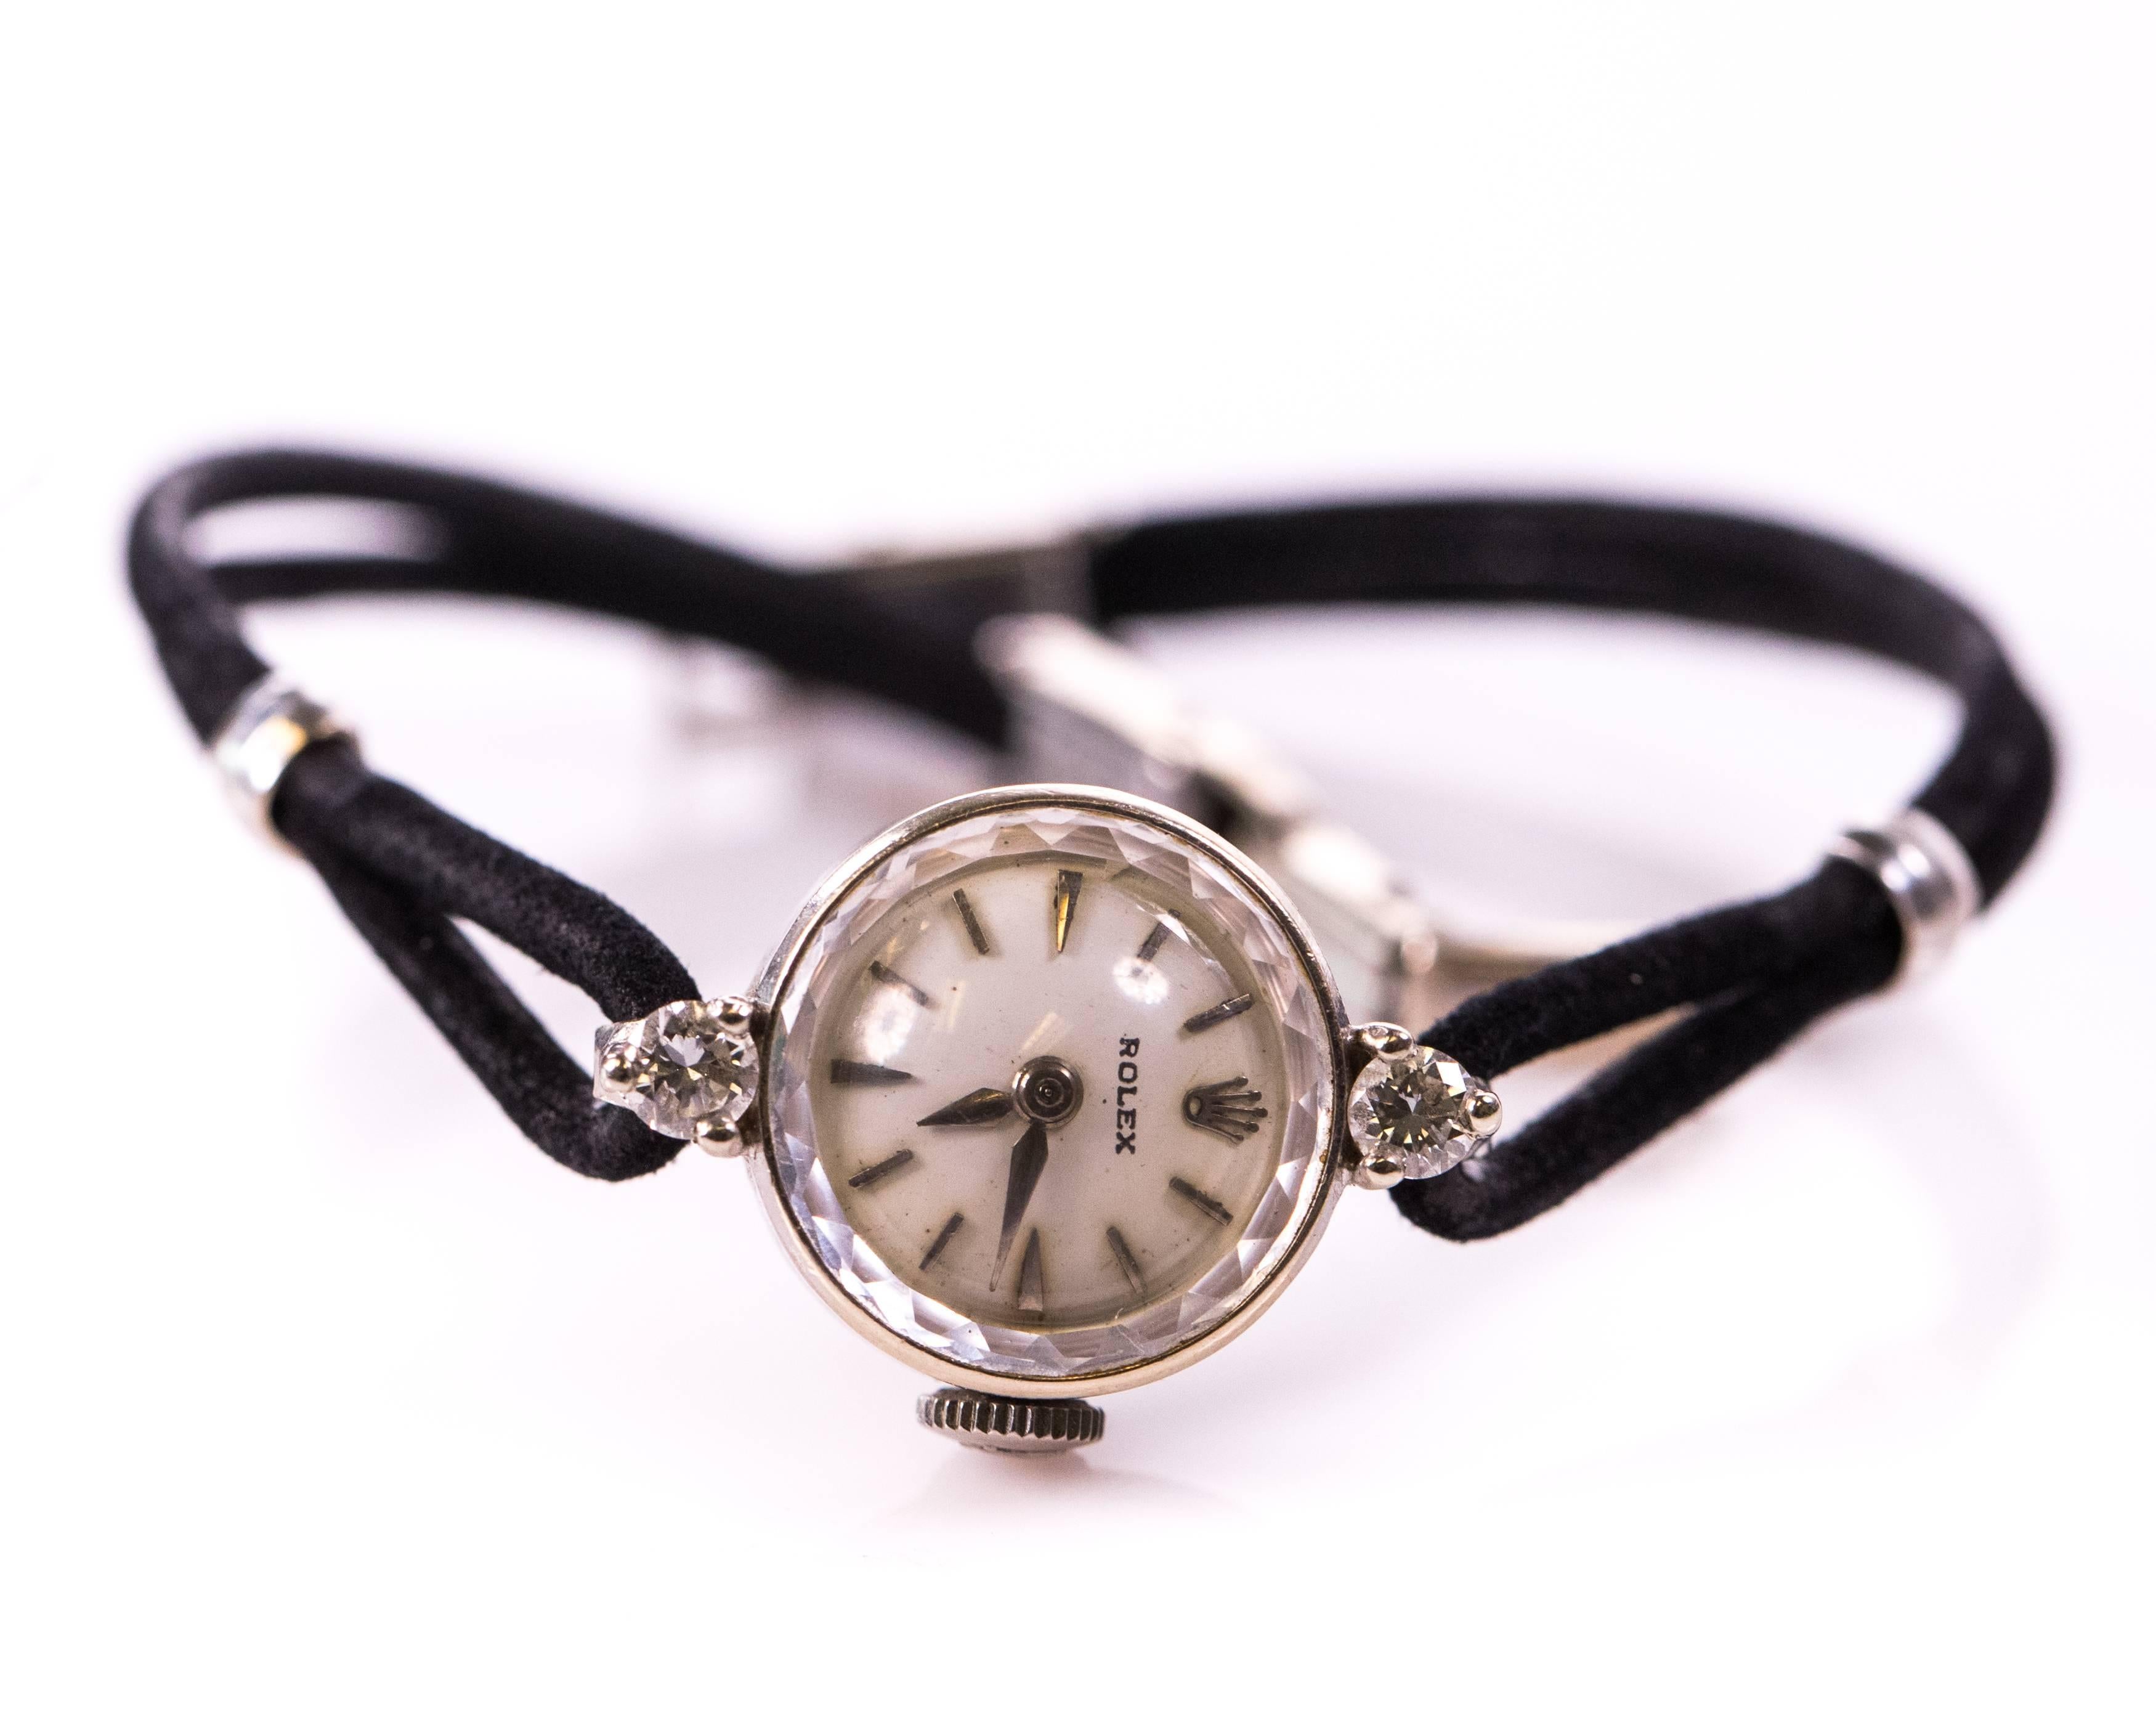 This 1940s Retro Rolex Diamond and 14K White Gold ladies watch features a .20 carat round brilliant diamond at the 12:00 and 6:00 positions. The black satin cord custom bracelet has a secure locking clasp and will fit up to a 7.5 inch wrist. In true